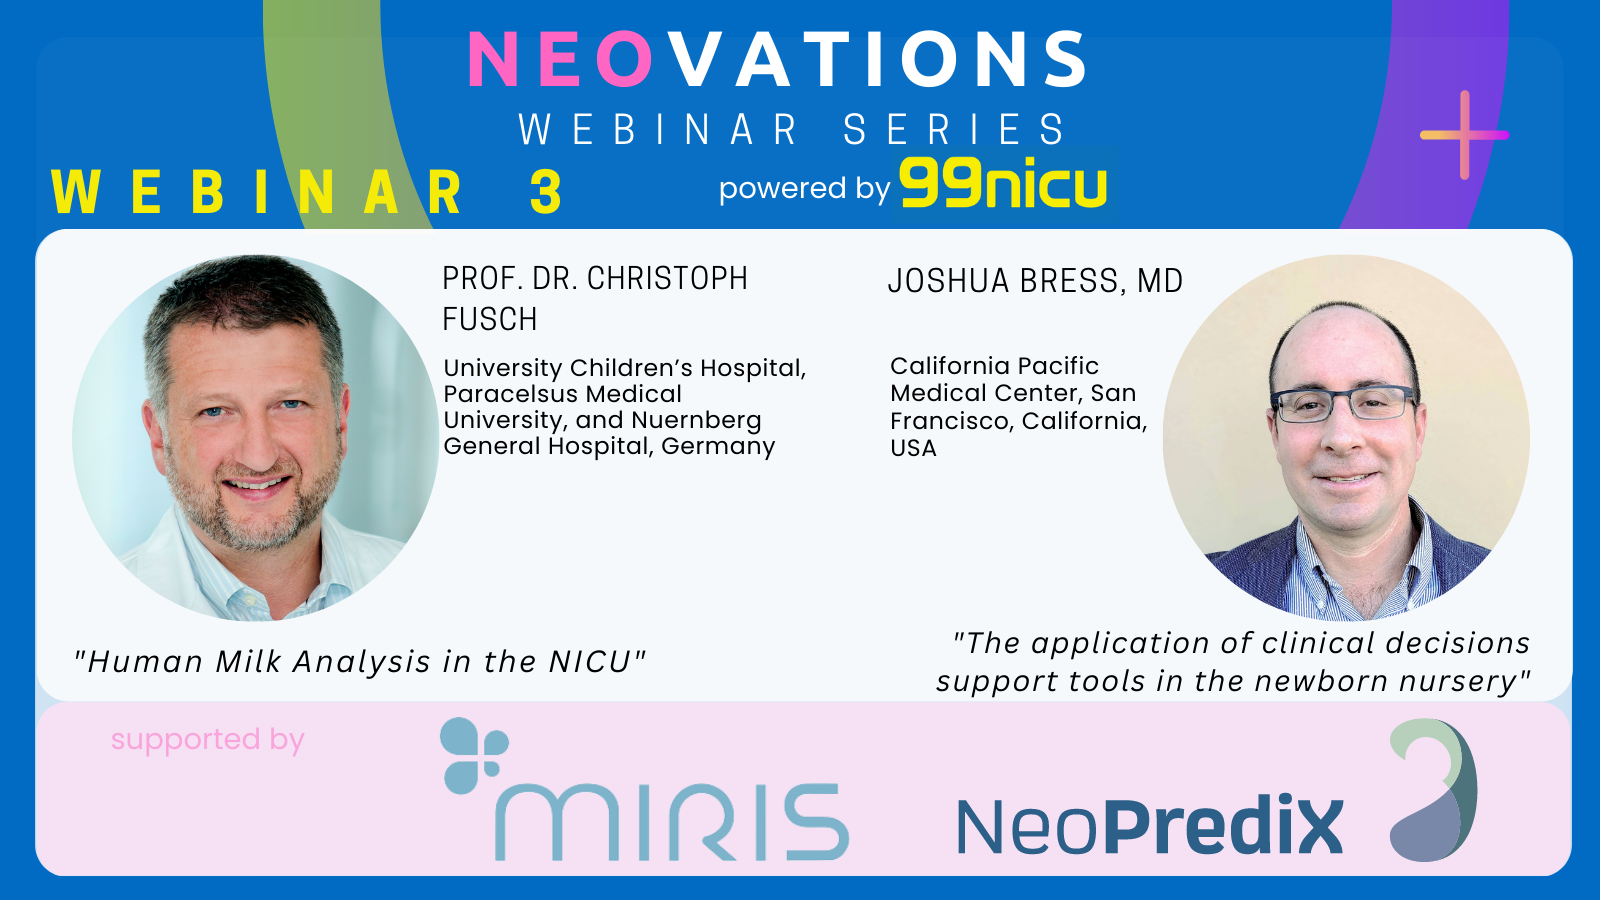 Our third NEOvations webinar is here!